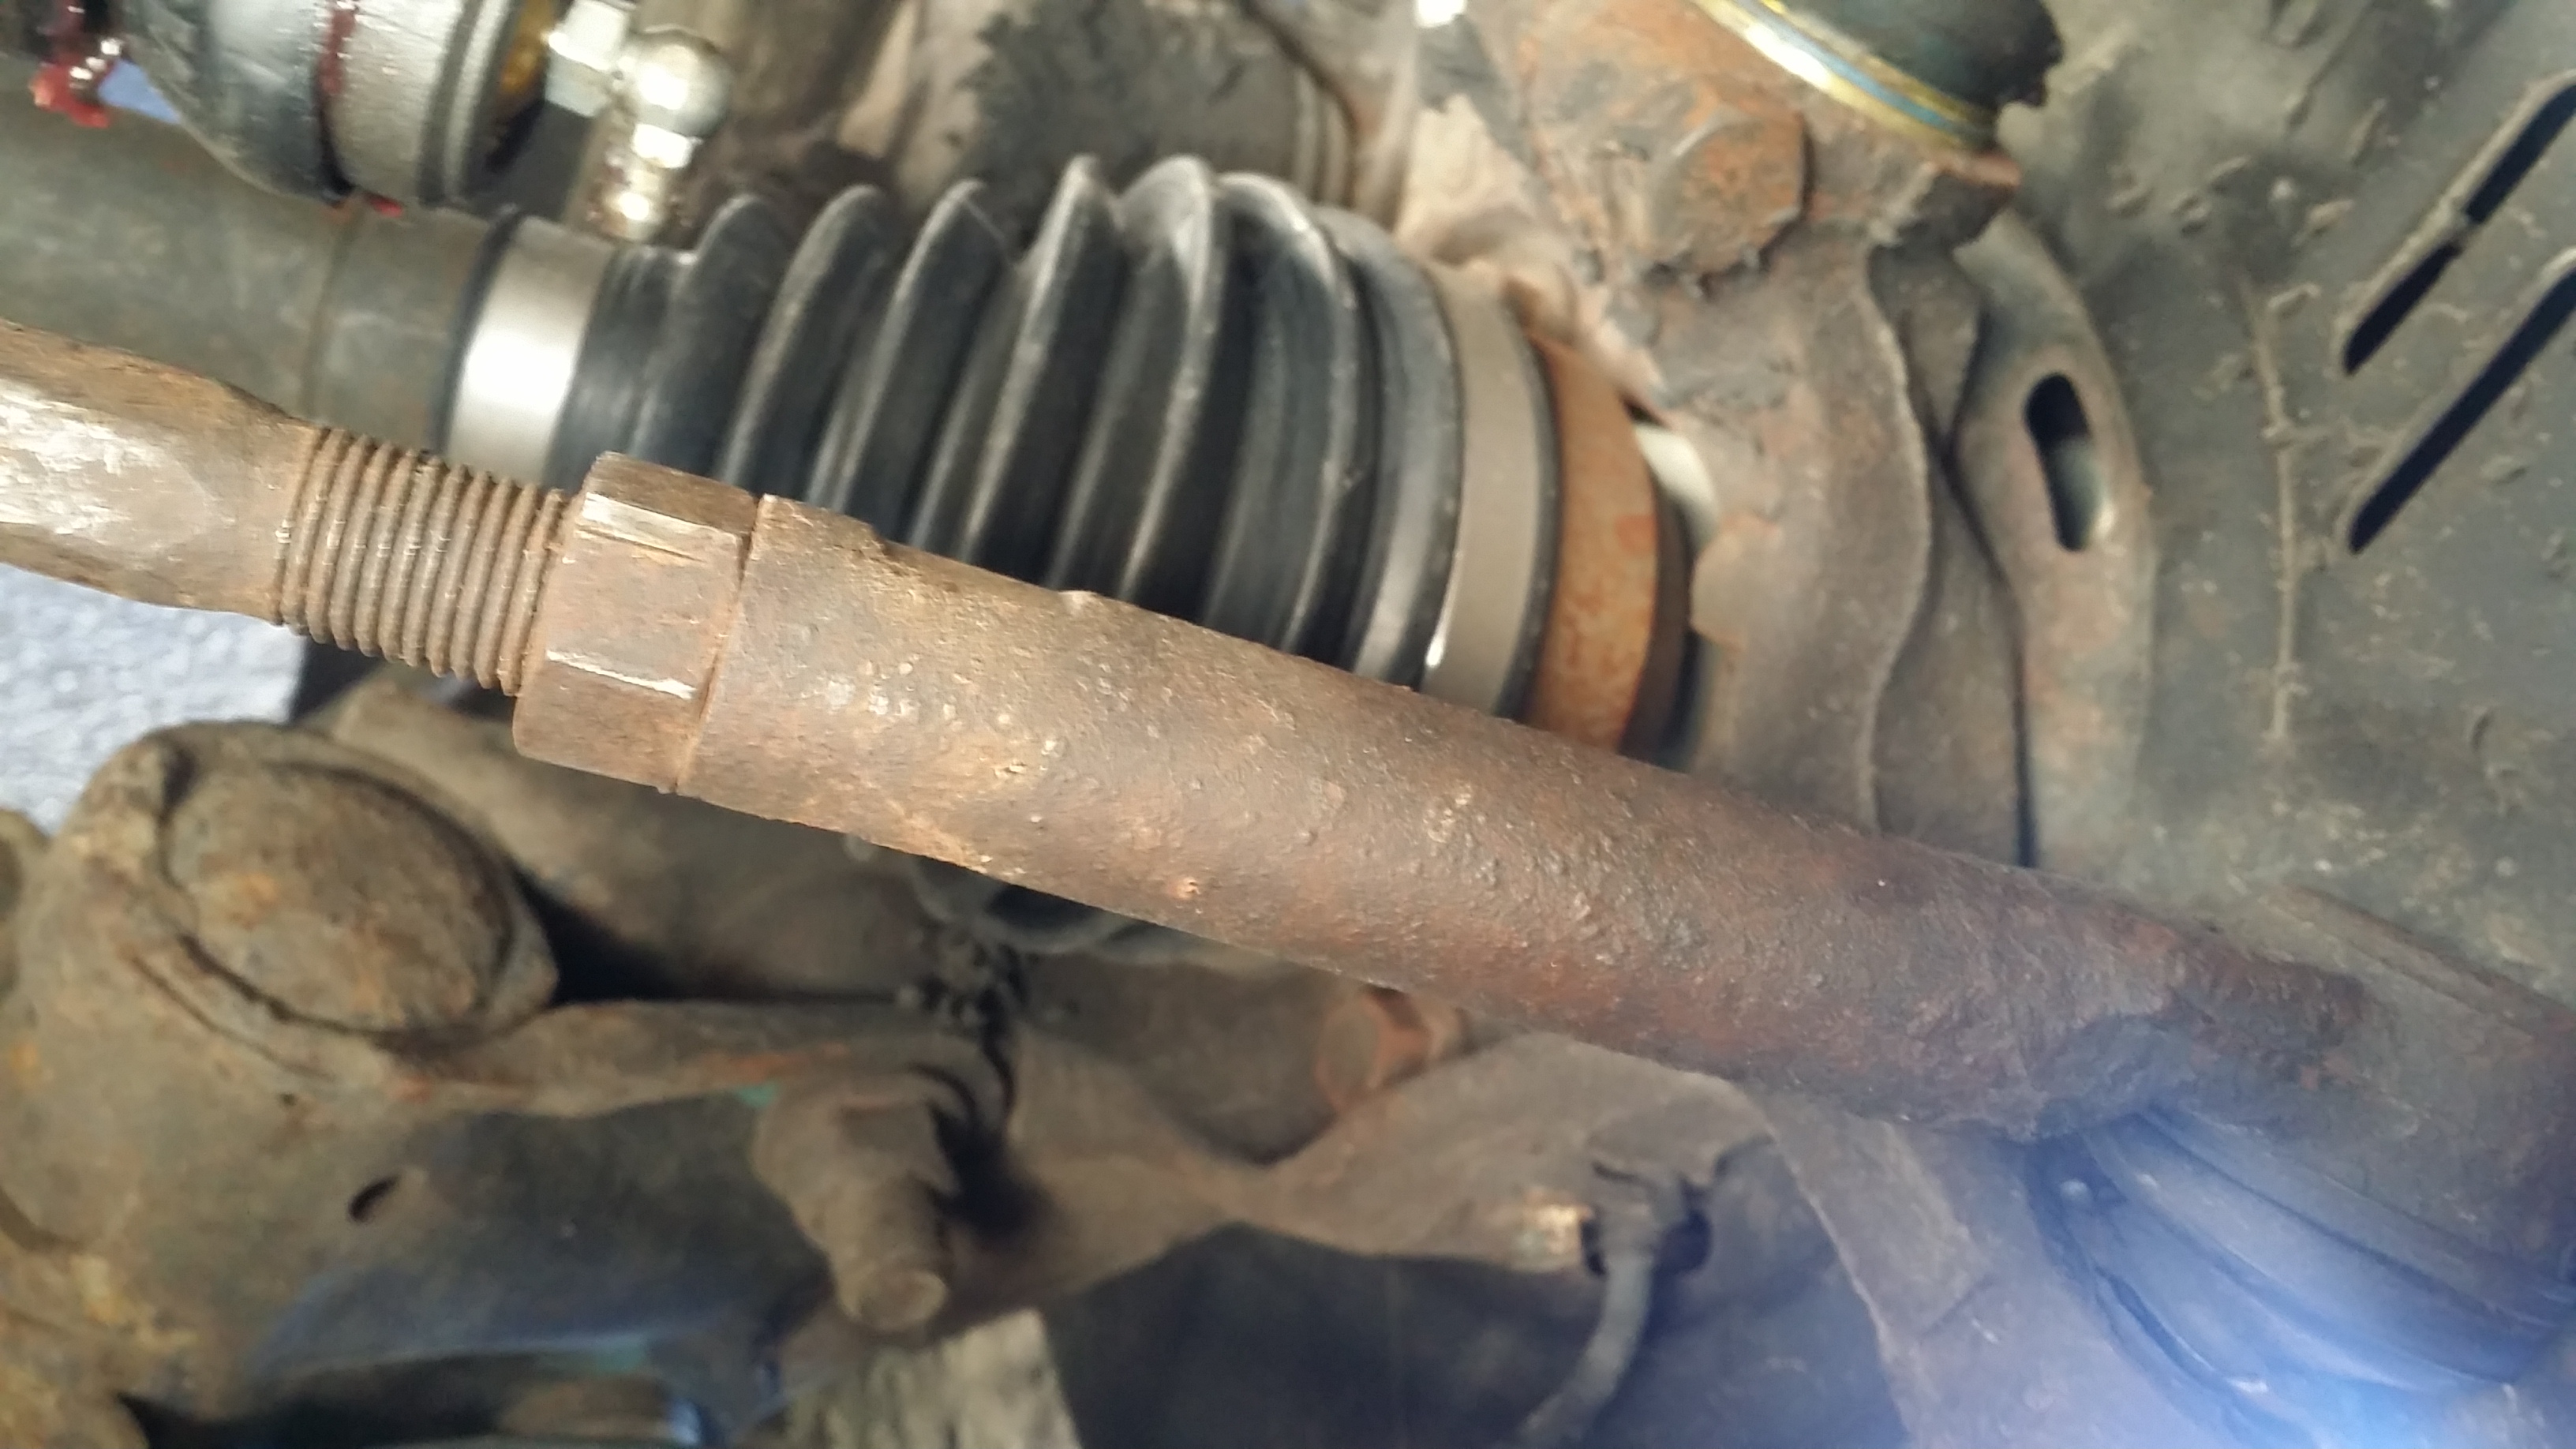 Tie rod ends that he said was replaced